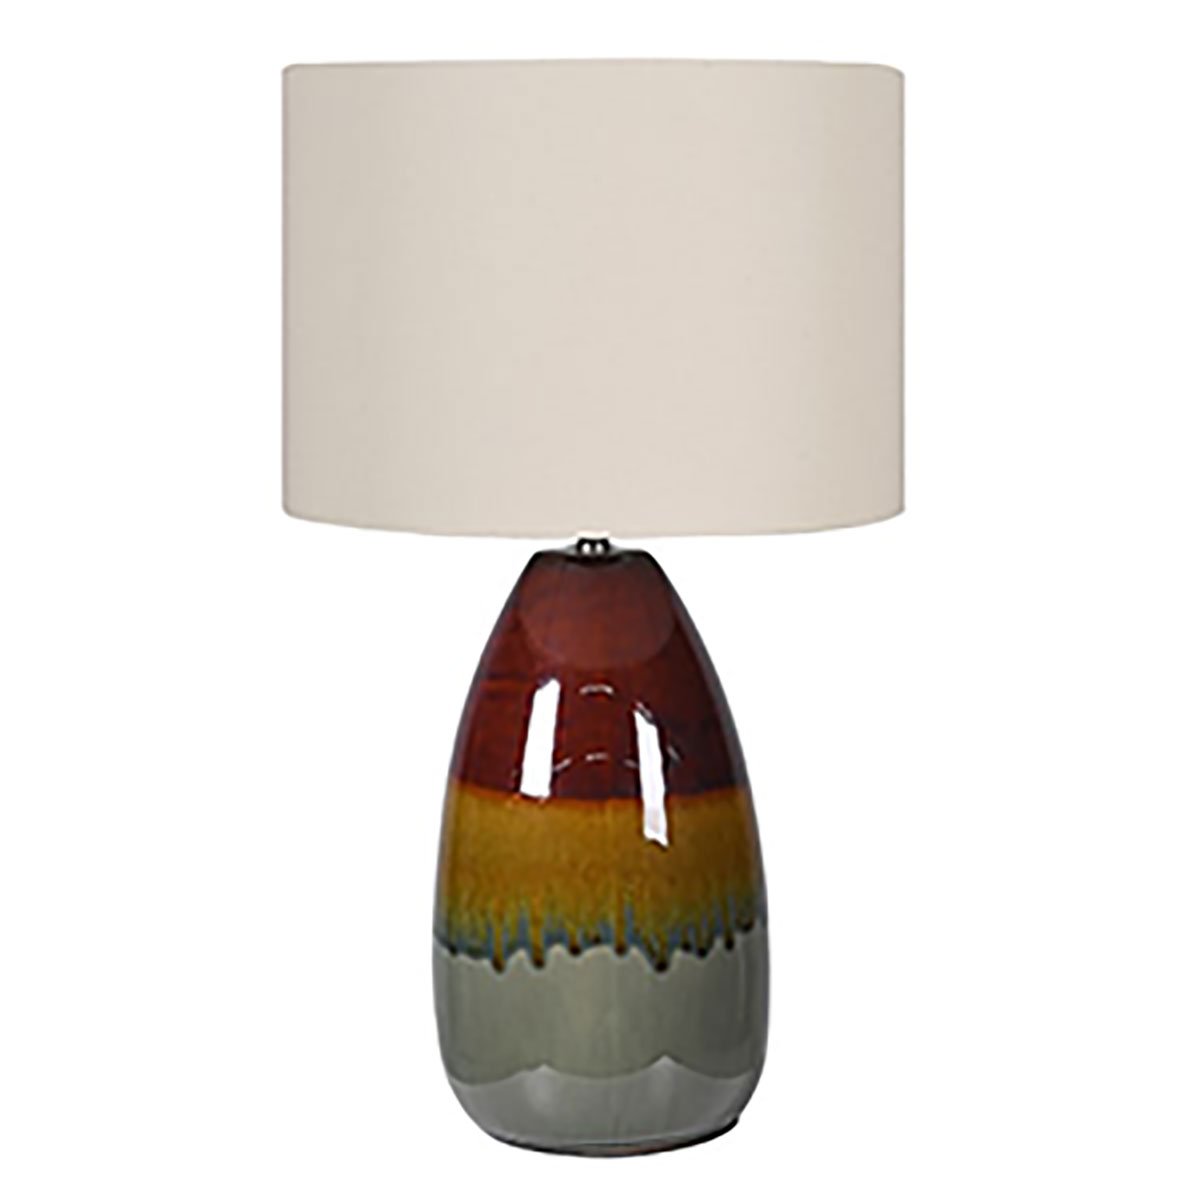 Blue and Brown Table Lamp